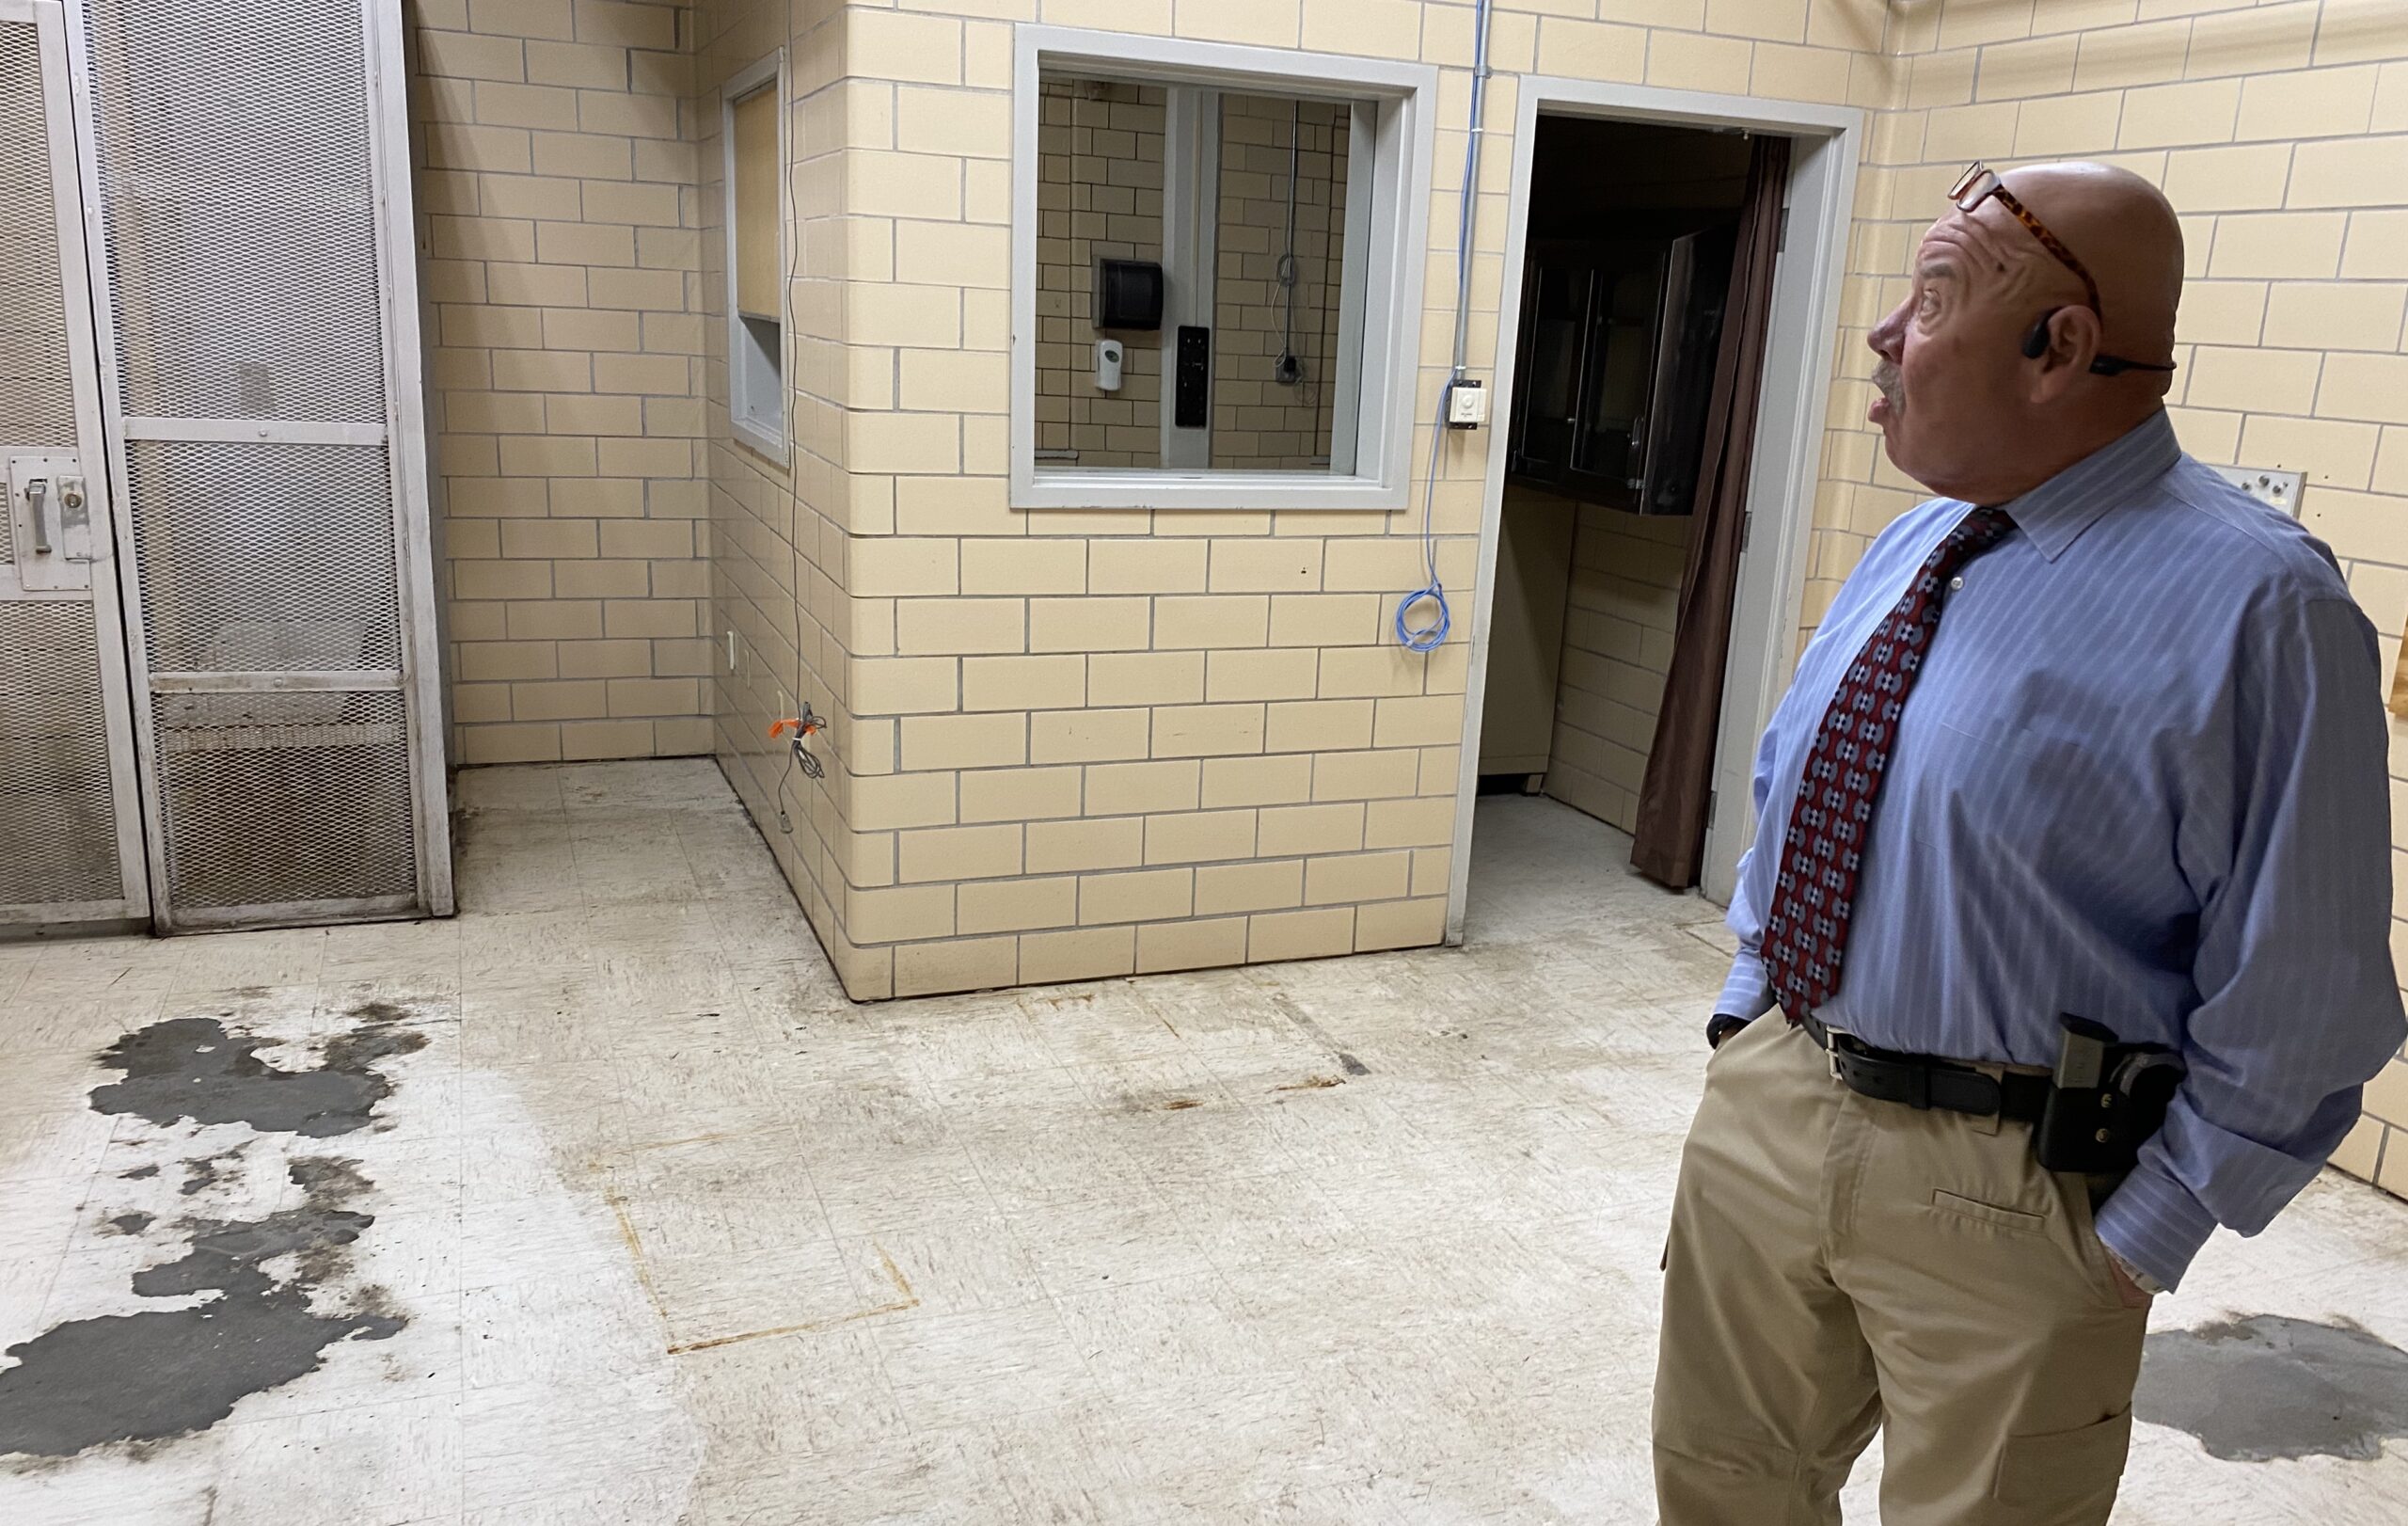 Grootens looks at old jail